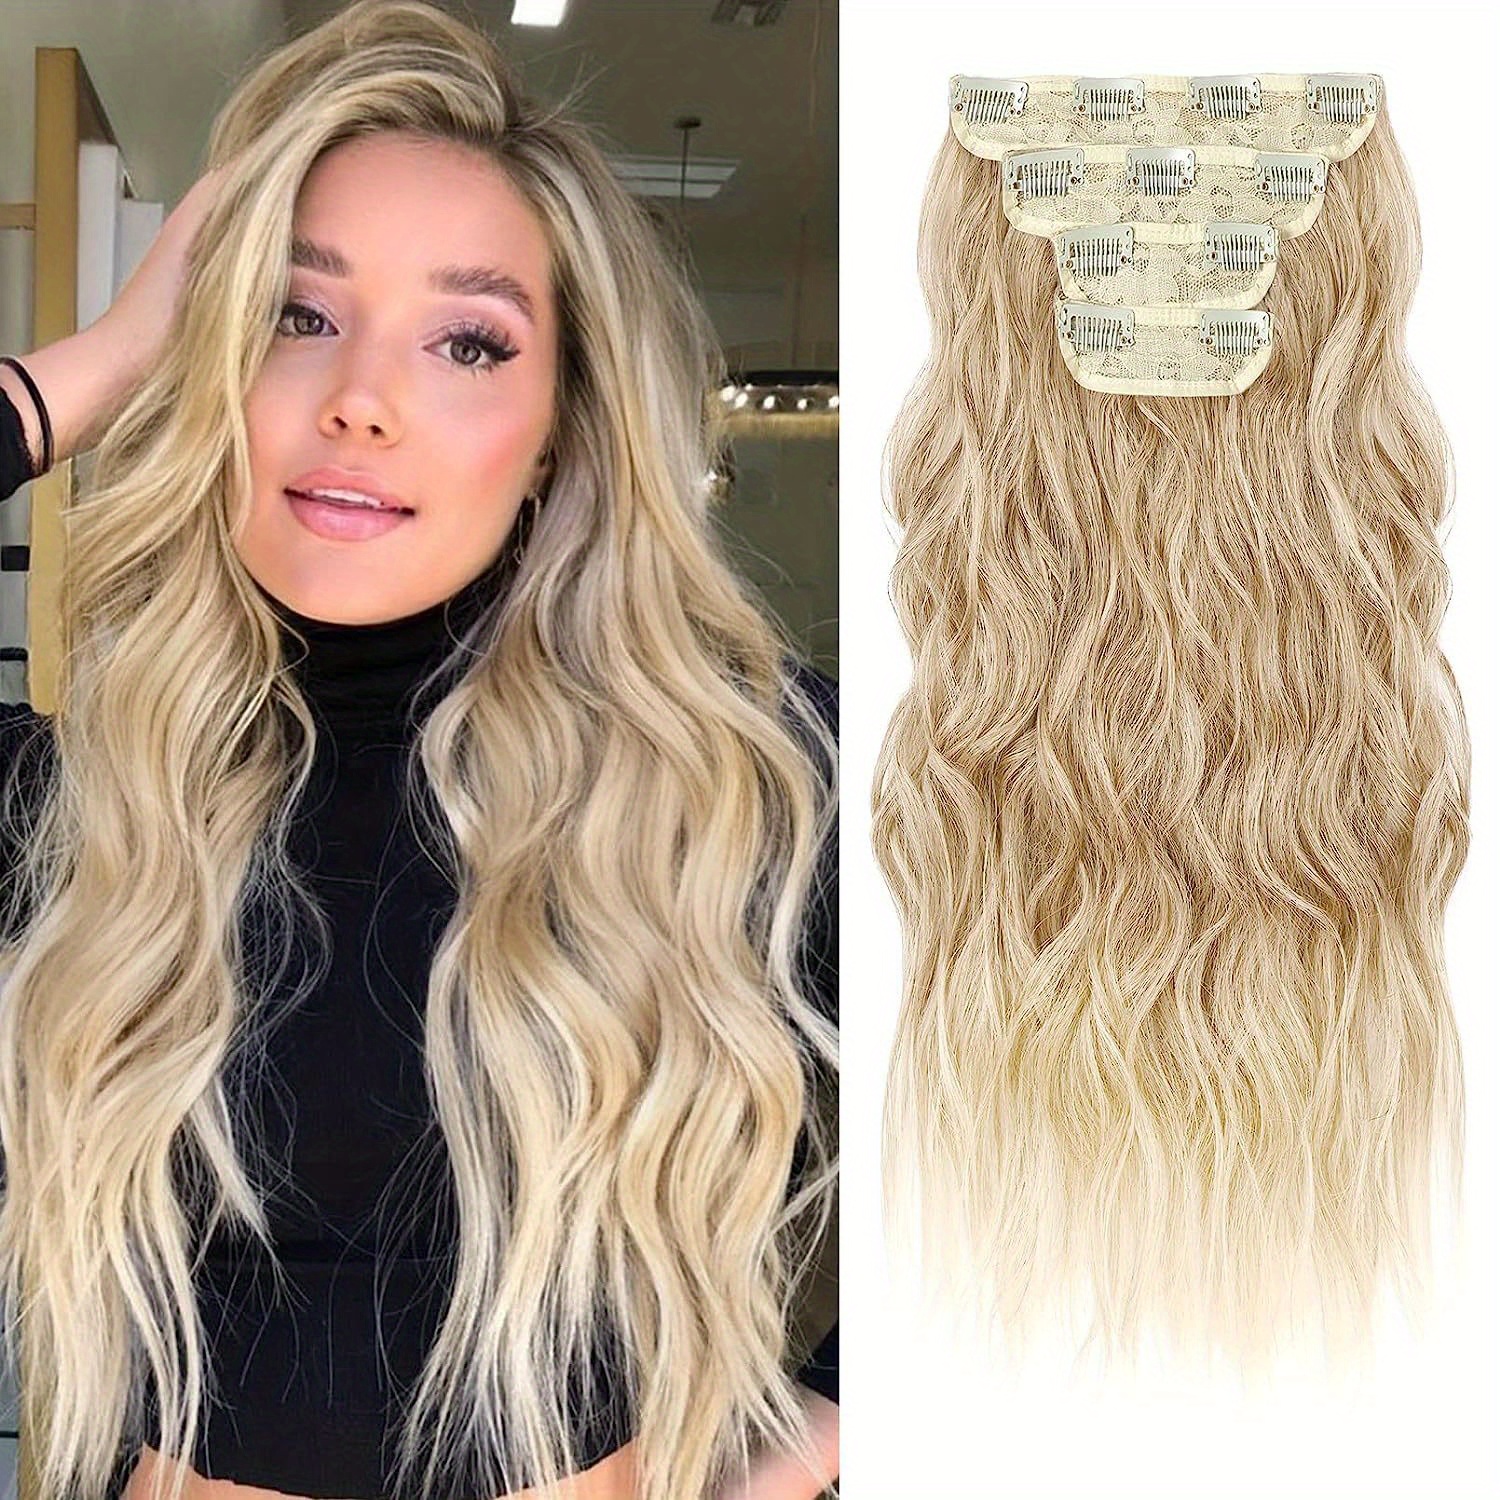 4pcs Hair Extensions, Human Hair Extensions, Dark Blonde with Light Blonde Ends, Clip in Hair Extensions Natural Soft Synthetic Hairpieces for